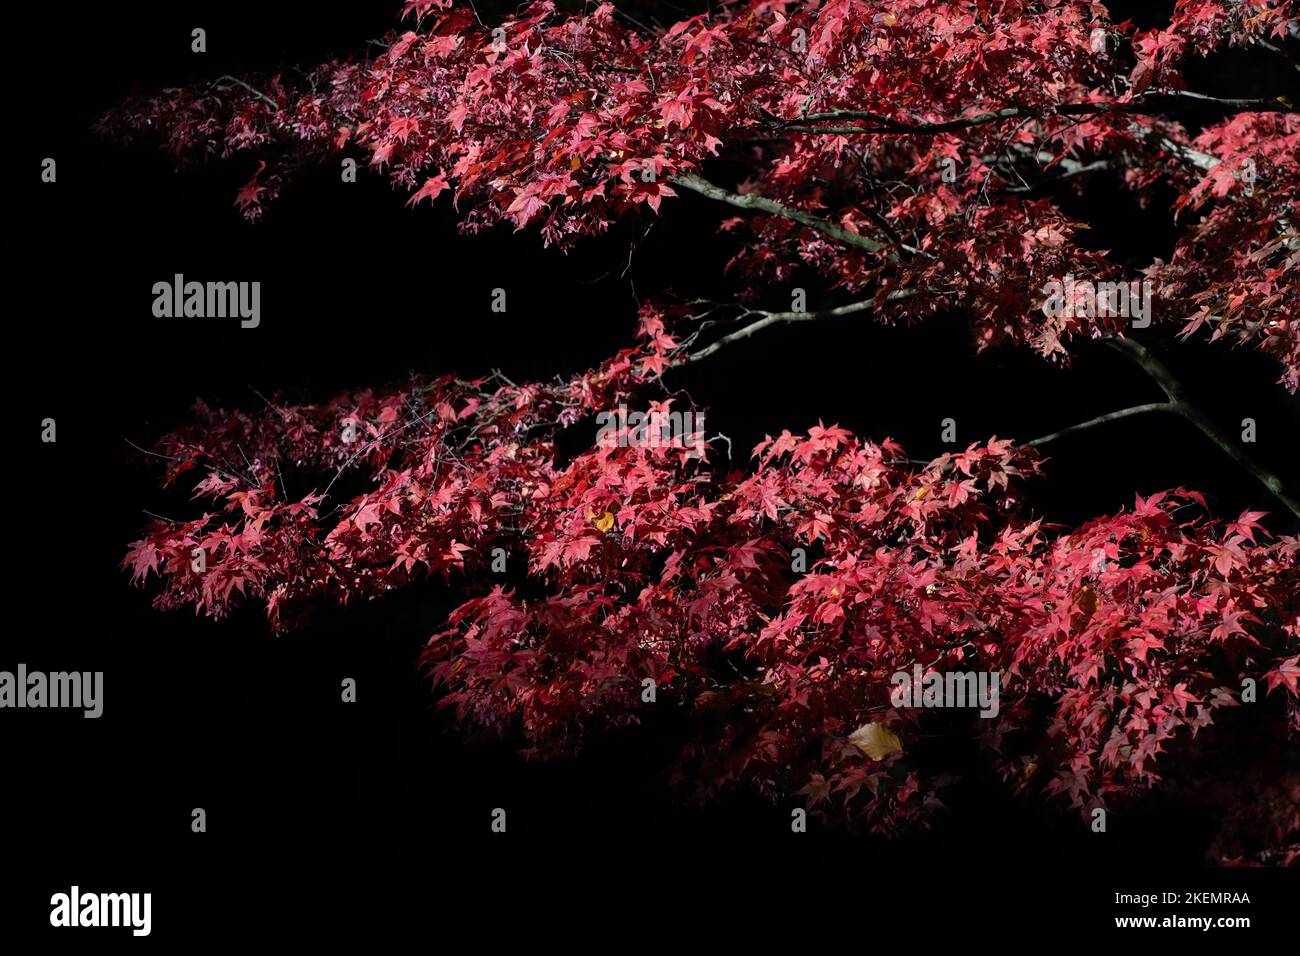 Branches of bright red maple in autumn, against a dark background in nature. Stock Photo